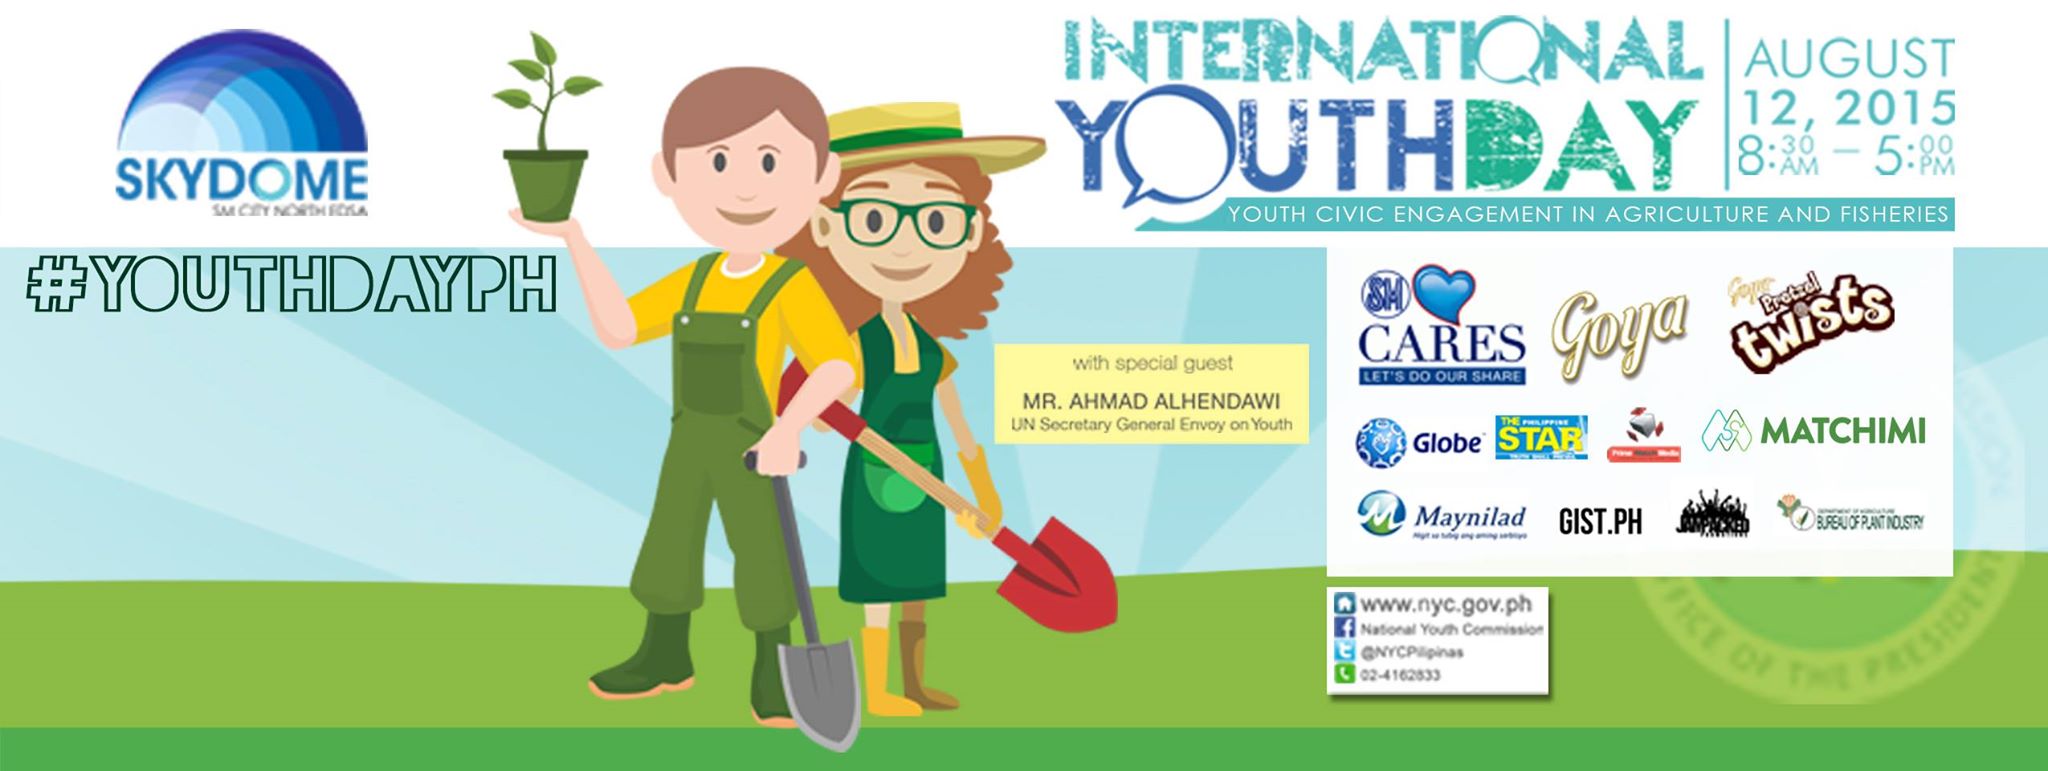 International Youth Day Wishes Picture